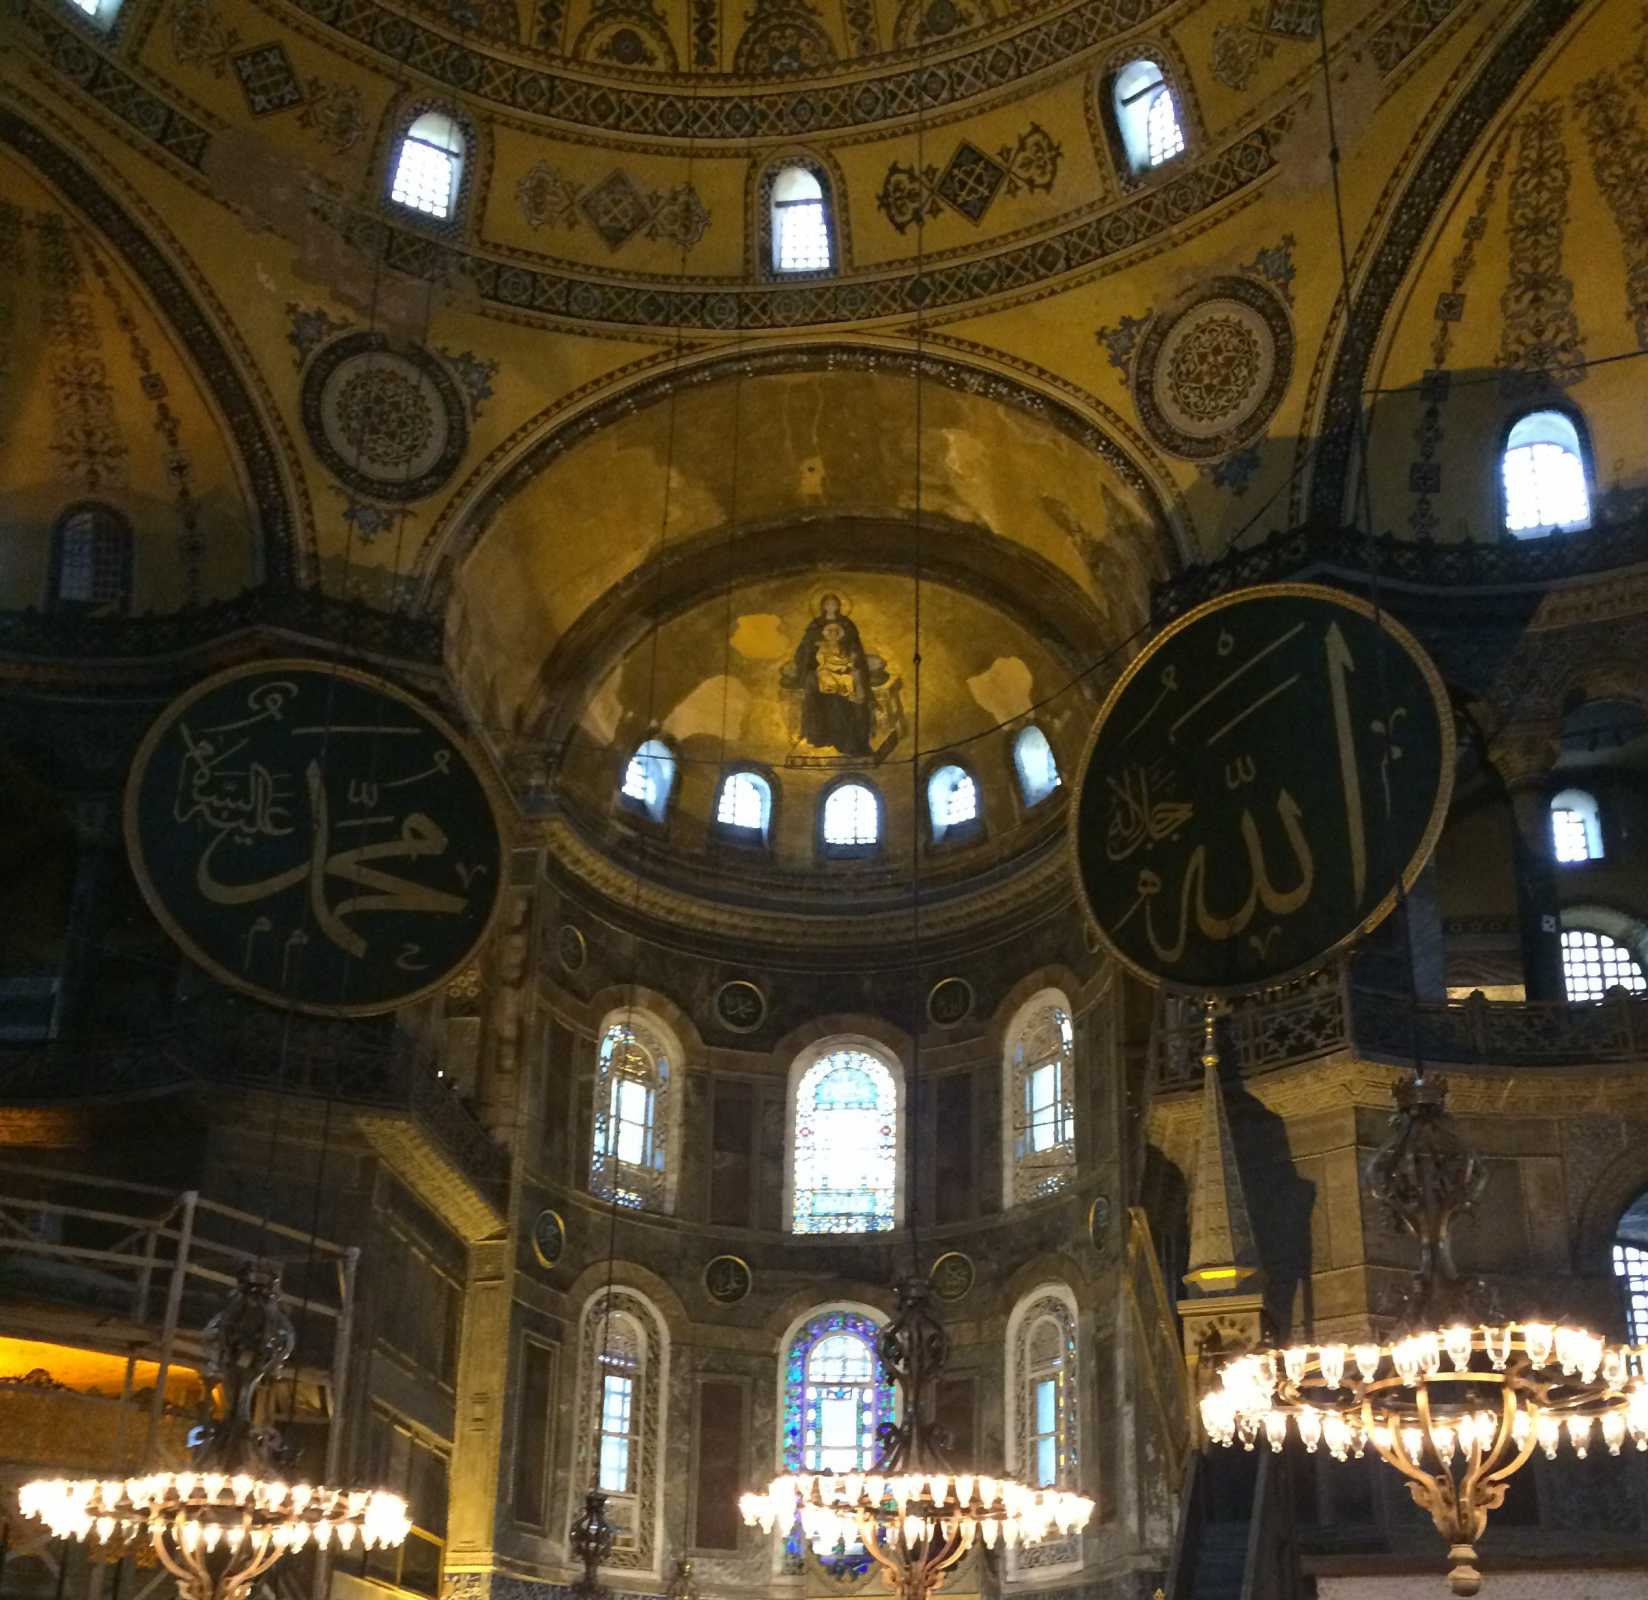 Response to the Conversion of the Hagia Sophia to a Mosque